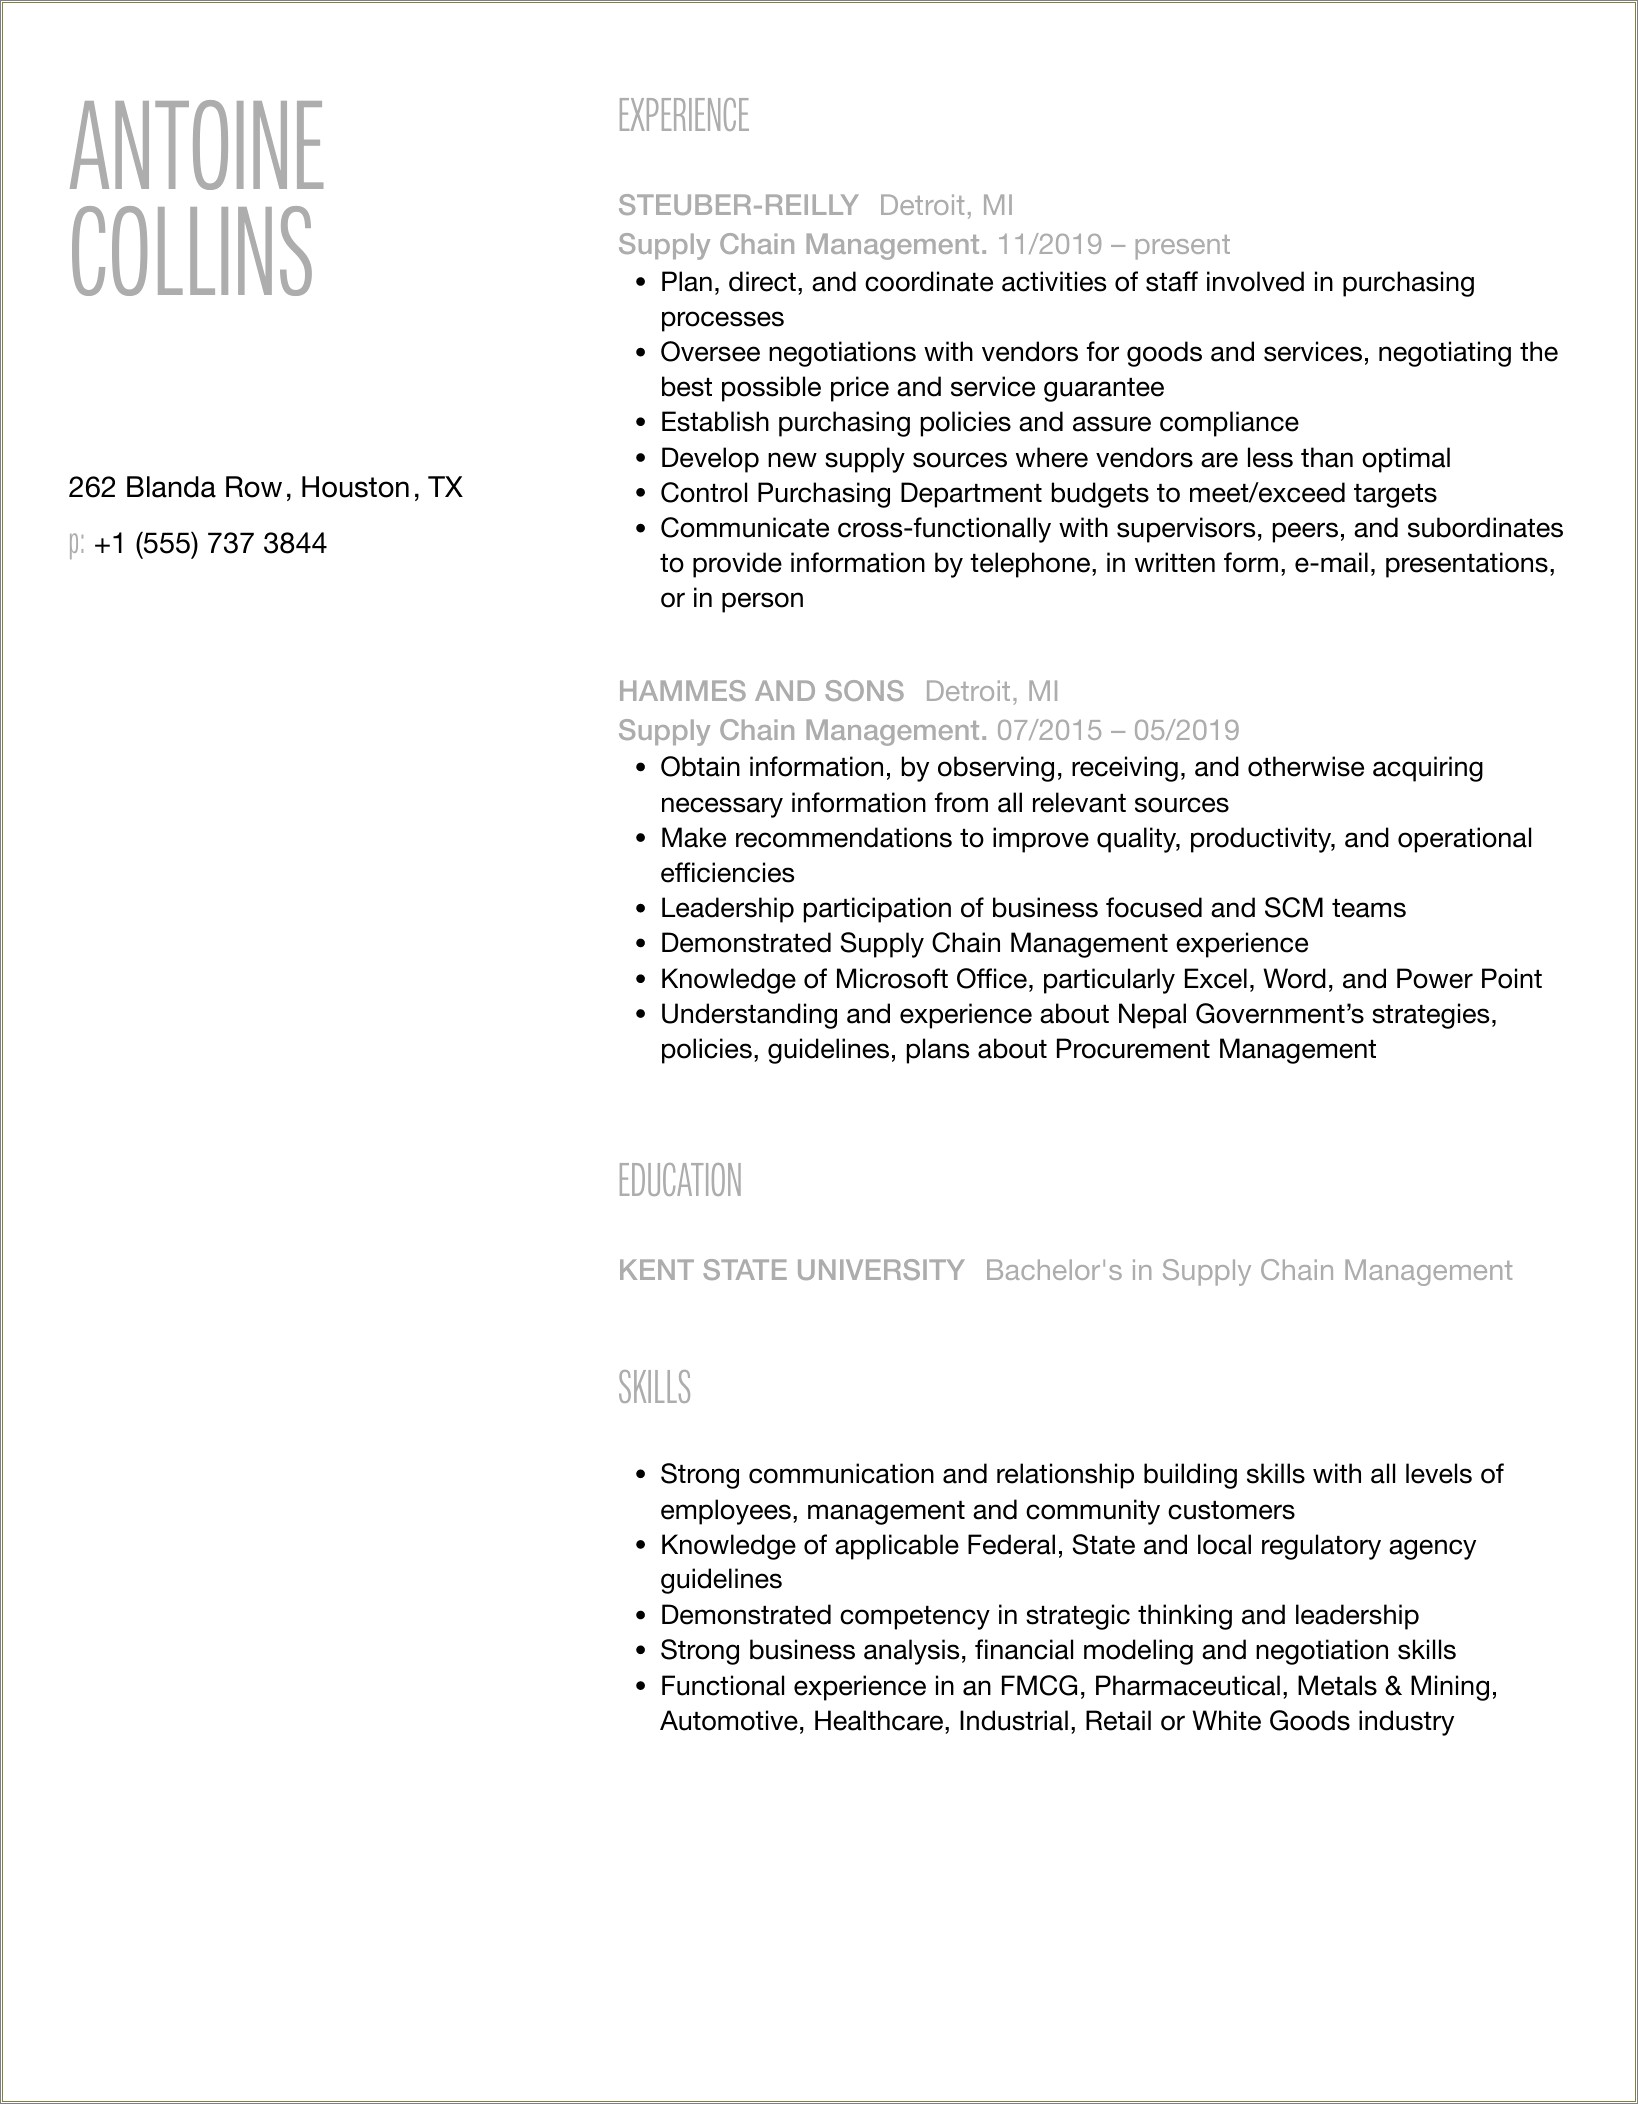 Active Supply Chain Group Member Resume Example